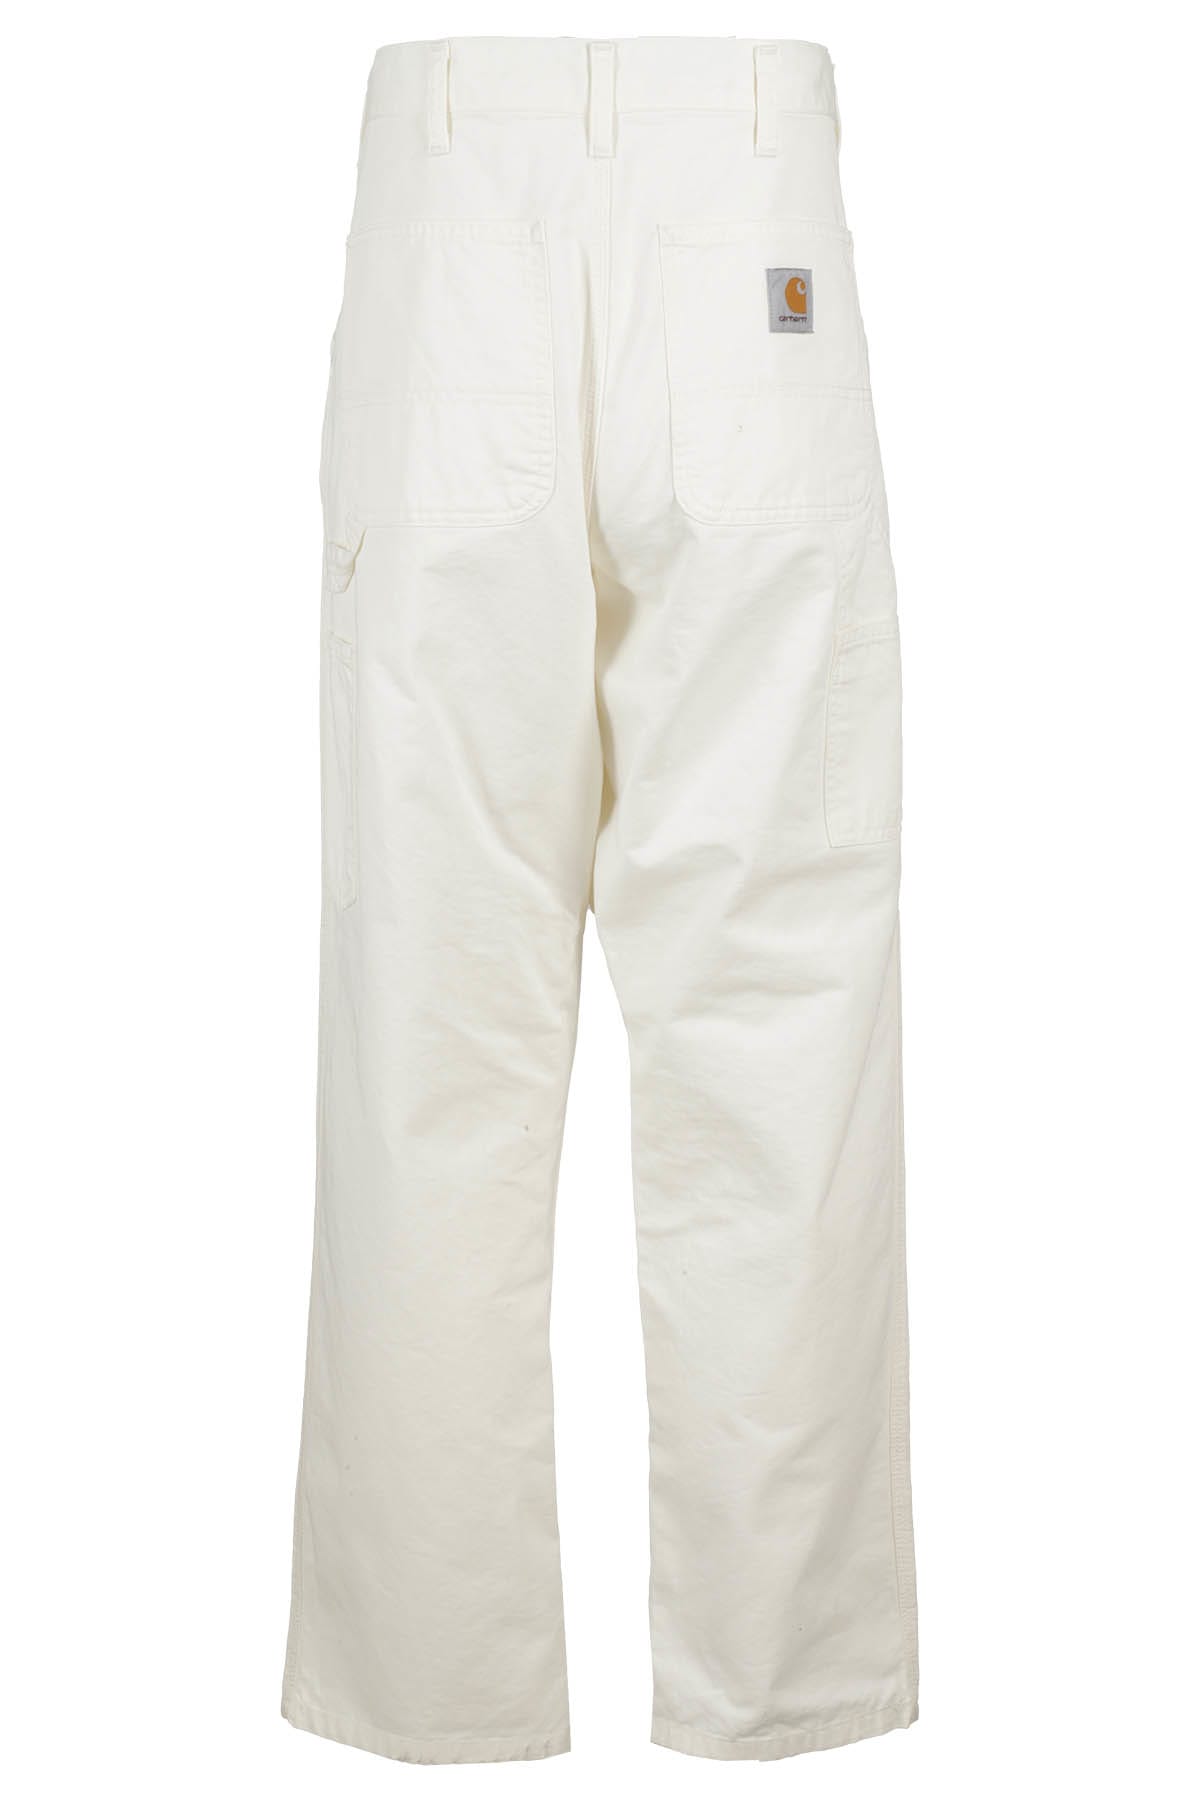 Shop Carhartt Single Knee Pant Newcomb Drill In Off White